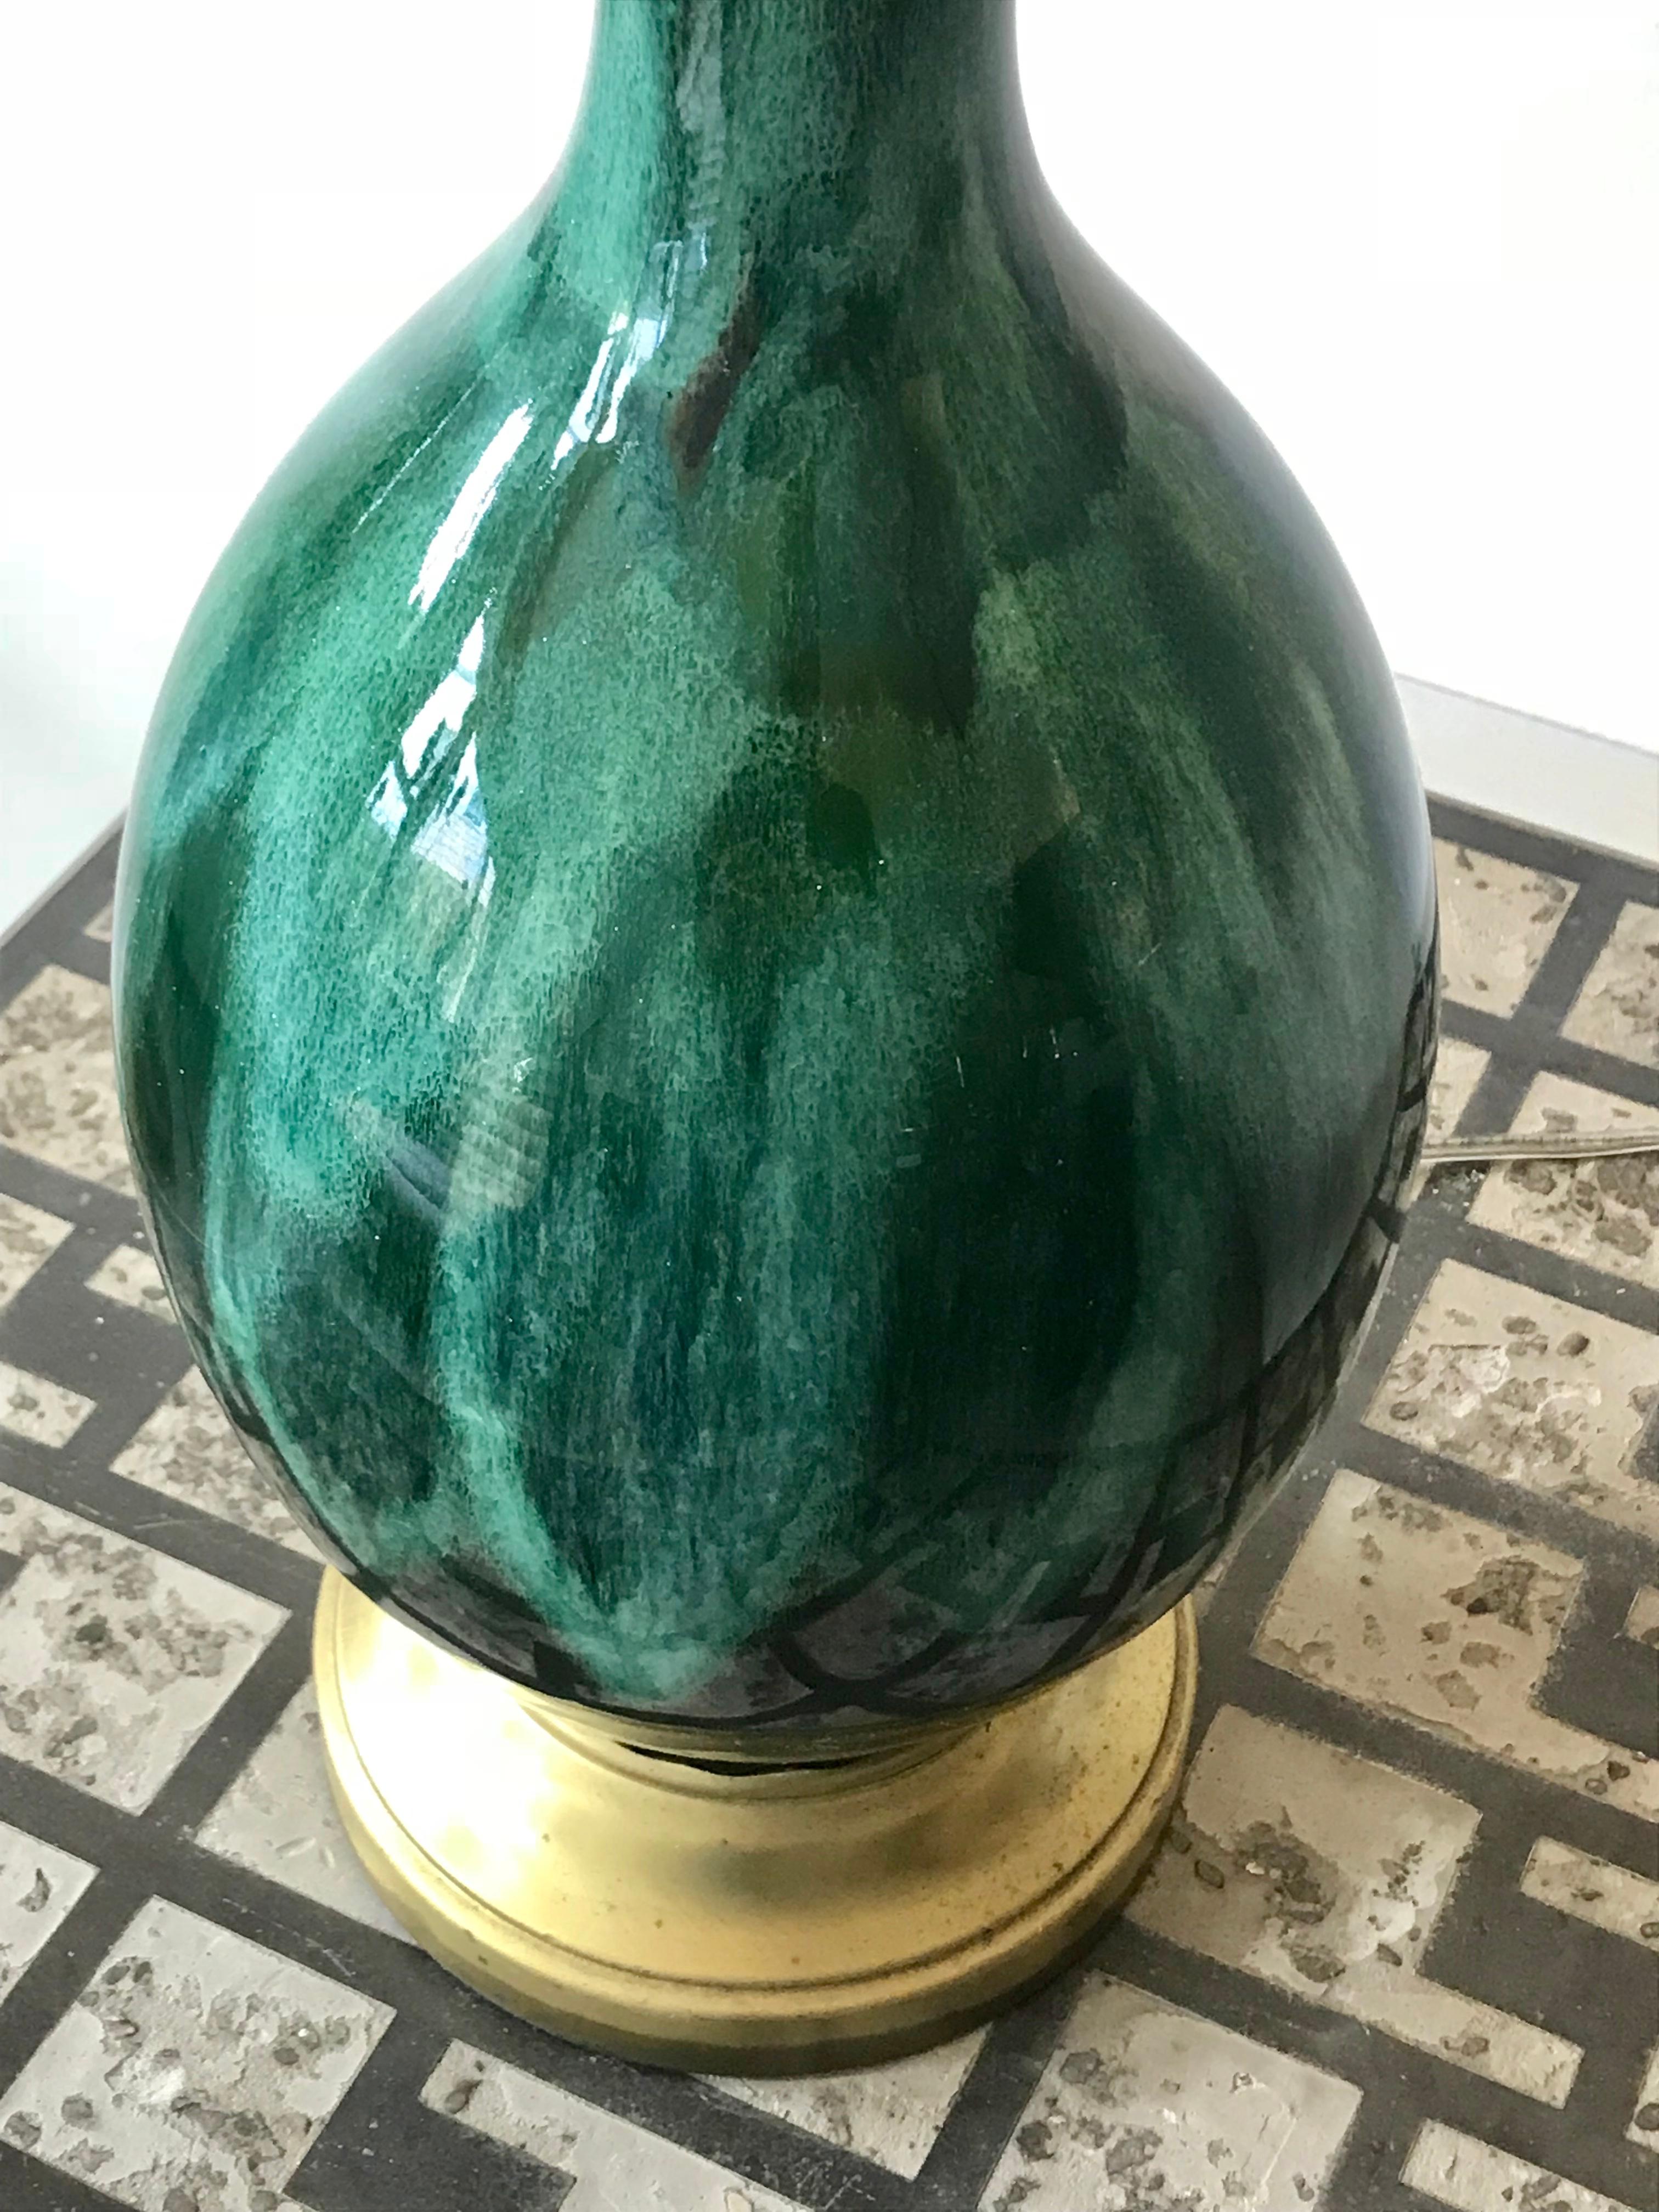 American Pair of Mid-Century Modern Green Drip Glaze Ceramic Table Lamps, 1960s